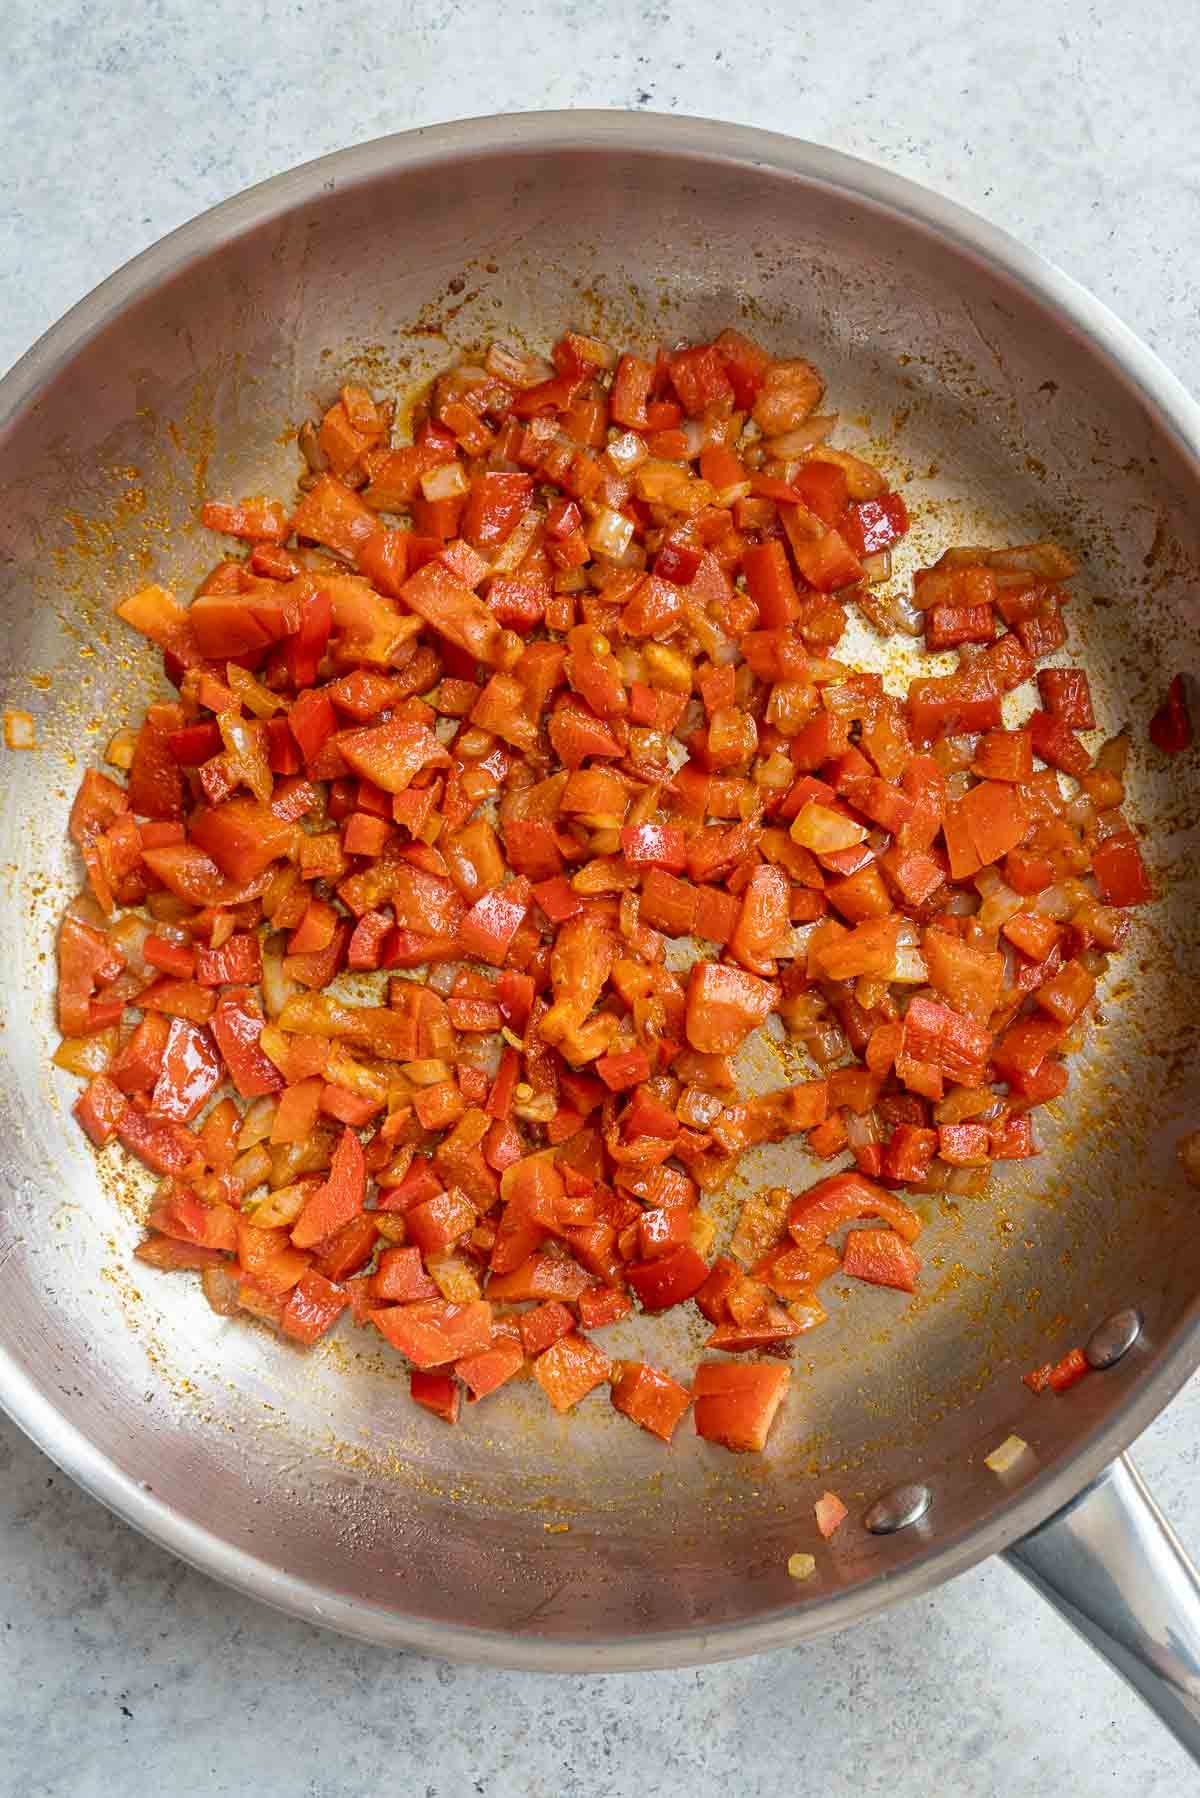 Stir Frying tomato and spices with the rest of the ingredients